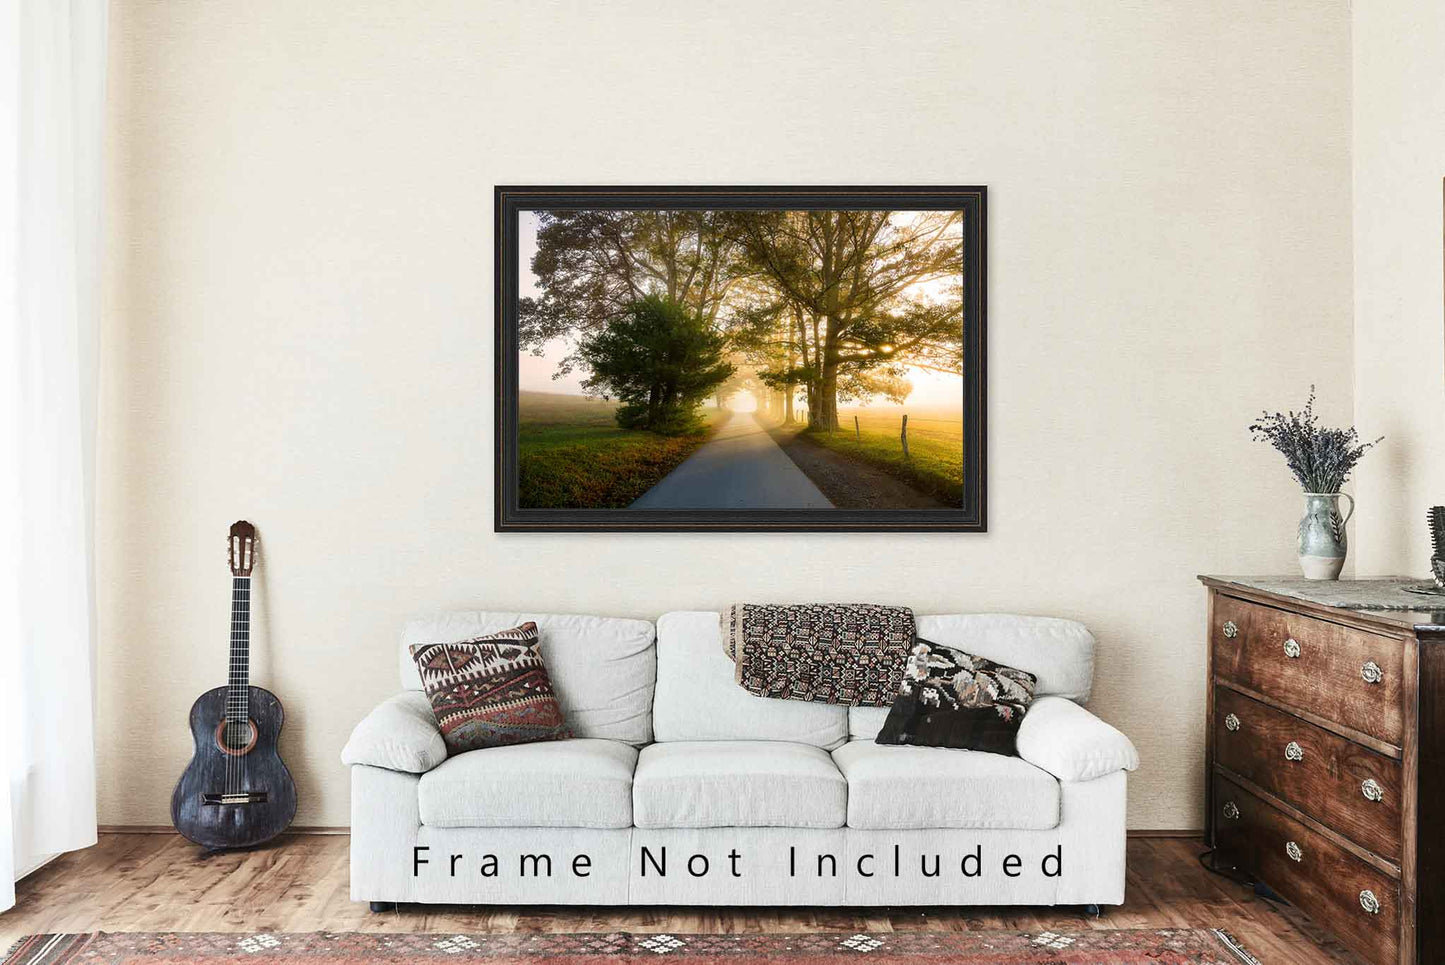 Tennessee Art Print - Fine Art Photograph of Road in Cades Cove Aglow From Fog in Morning Light Smoky Mountains Decor Landscape Picture